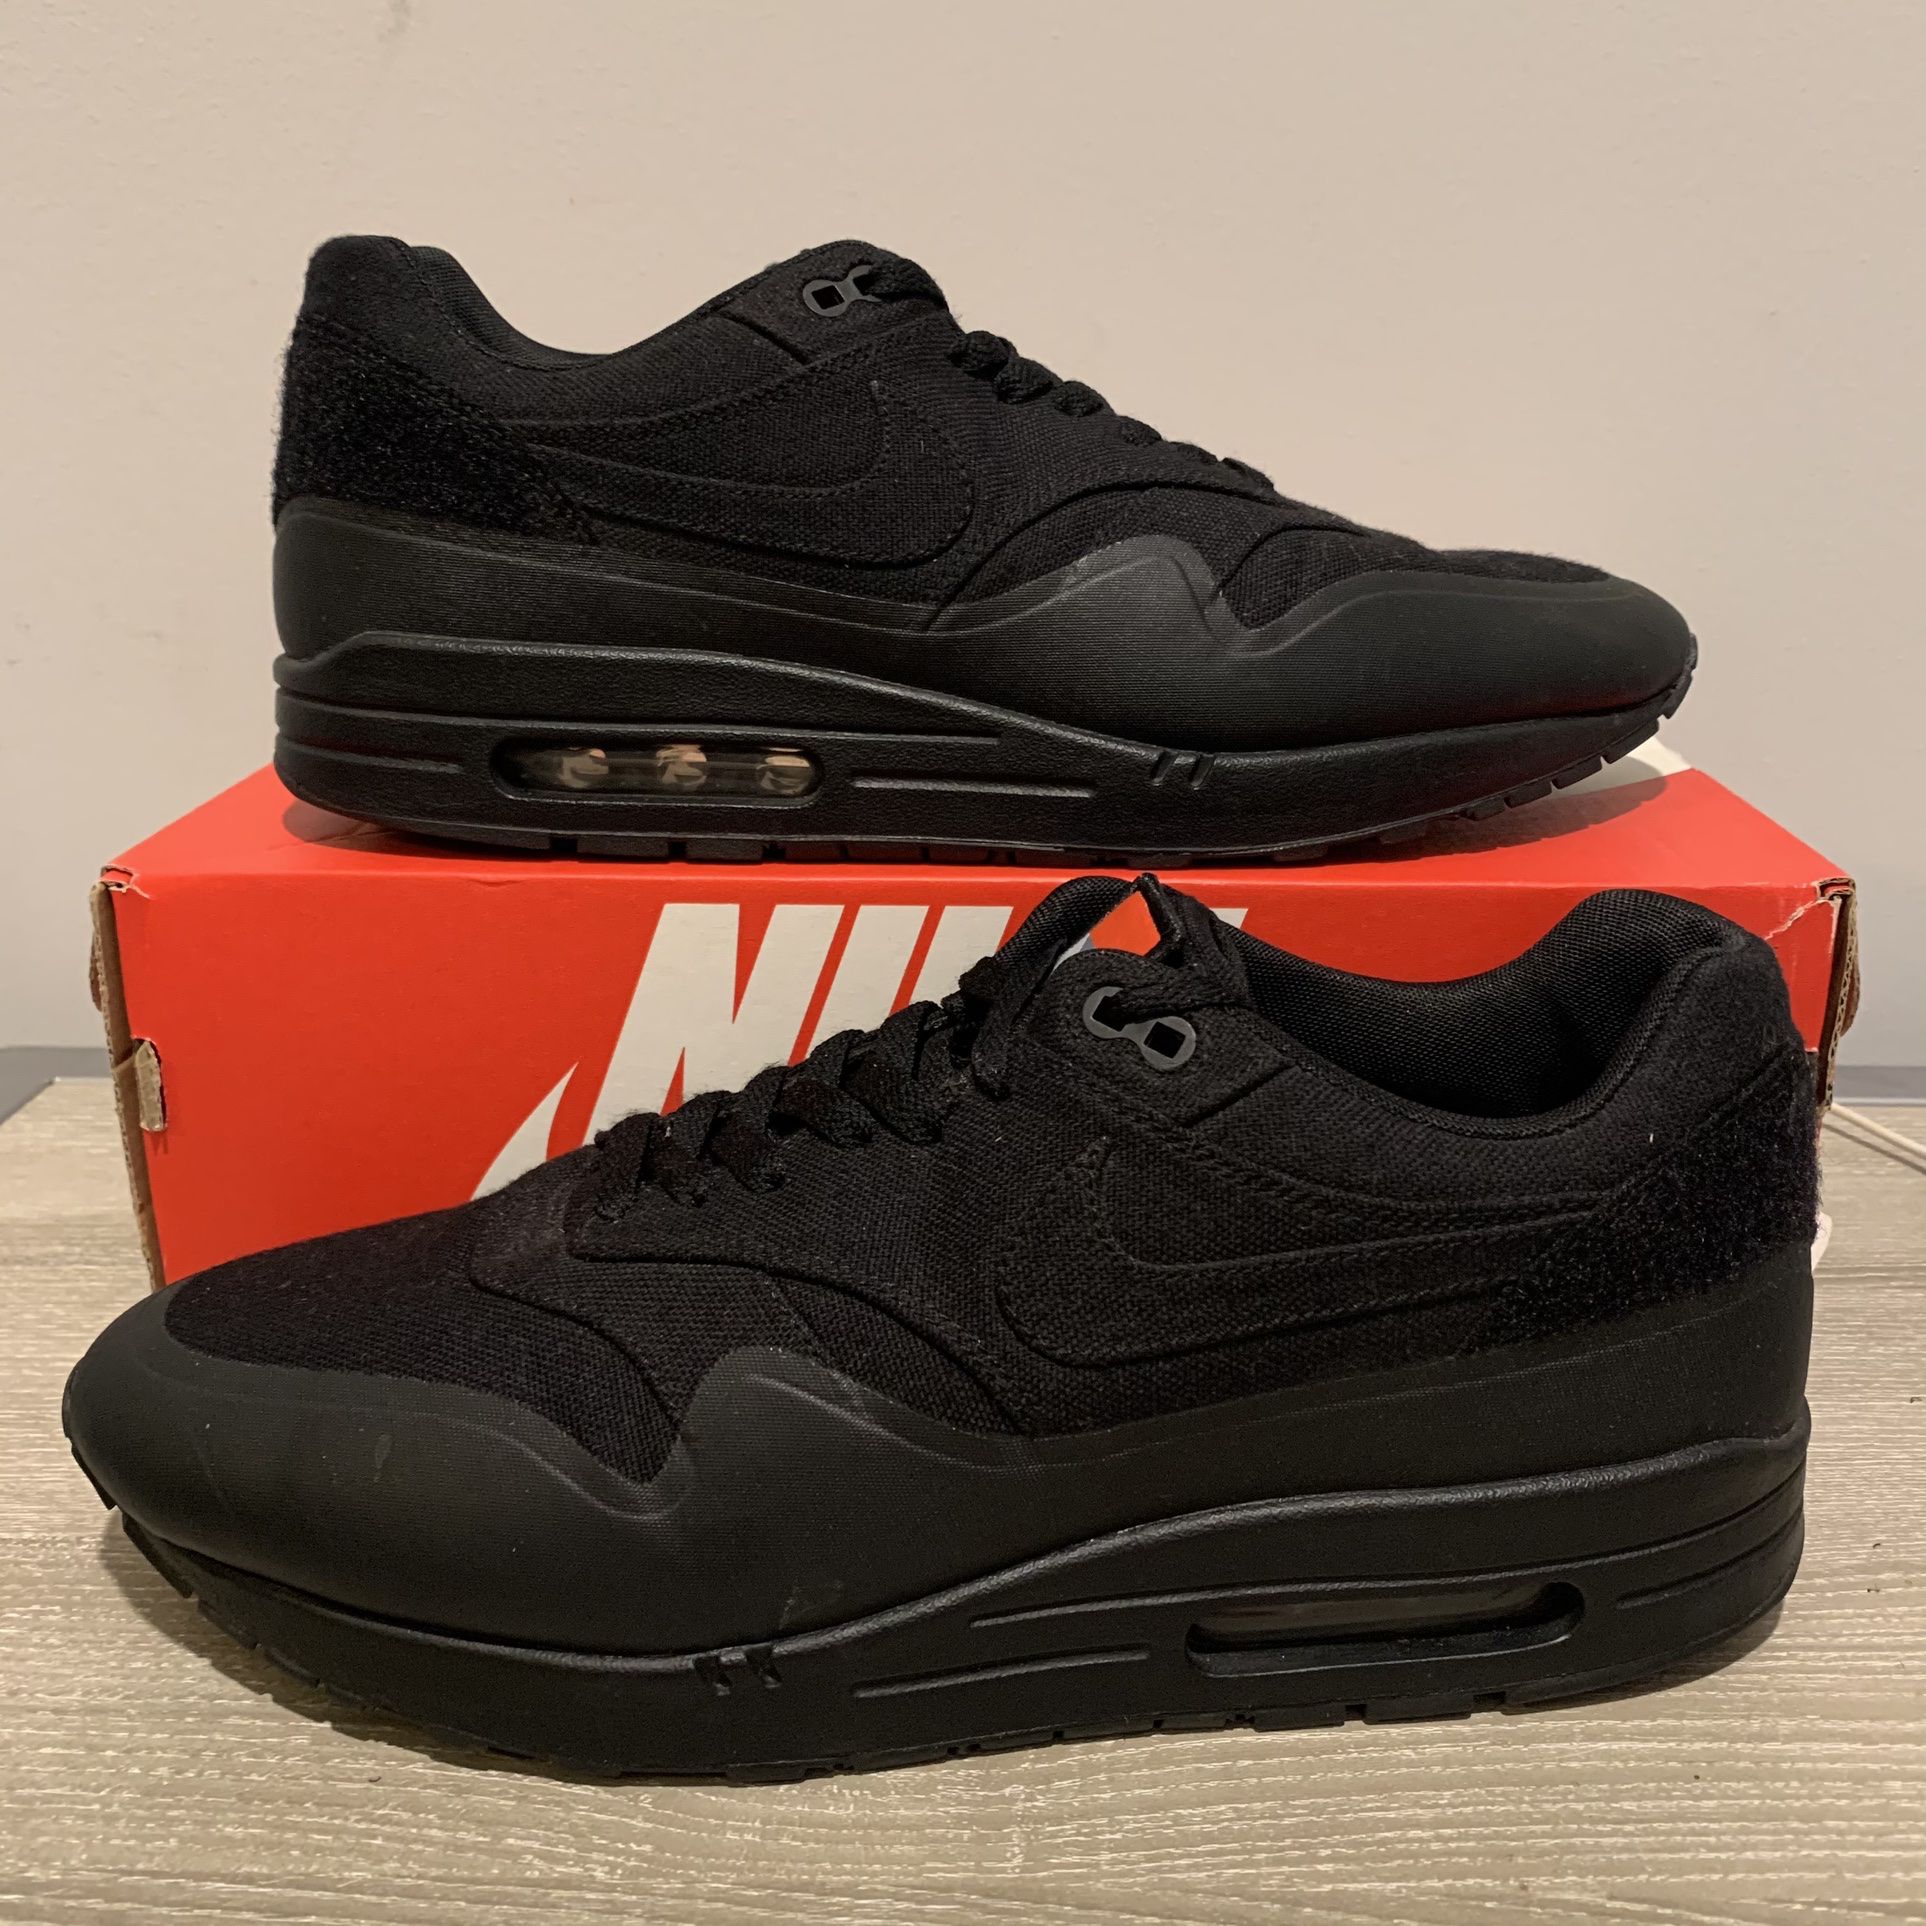 Nike Air Max 1 Black Patch Size 12